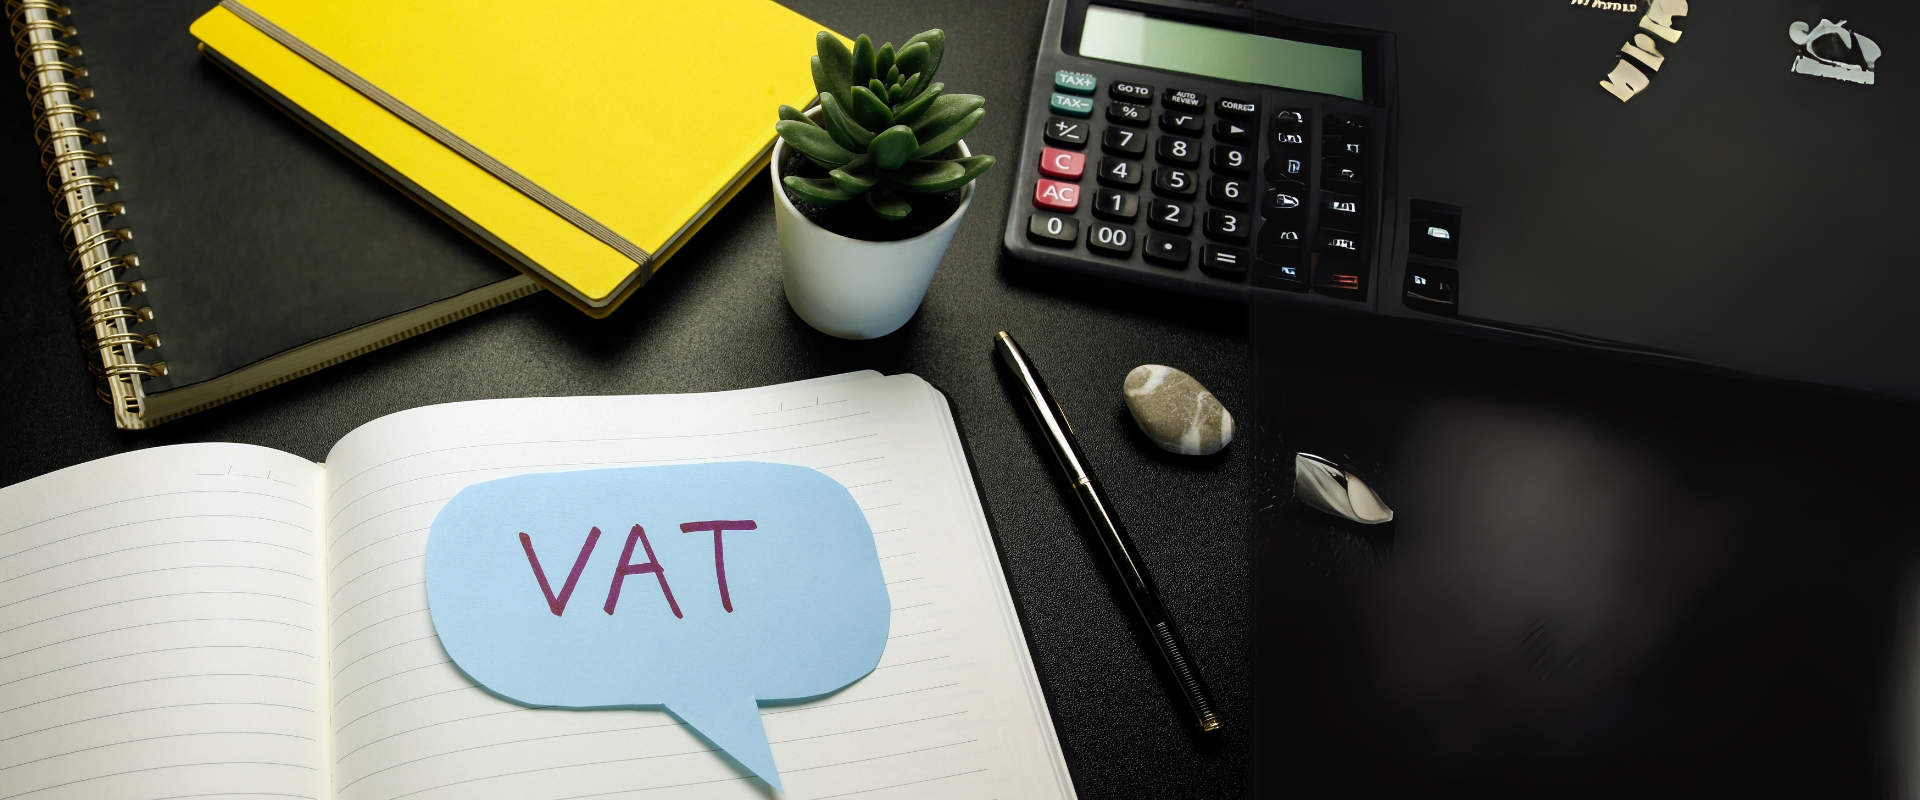 Complete Discussion of The Structure and Use of Domestic VAT Codes